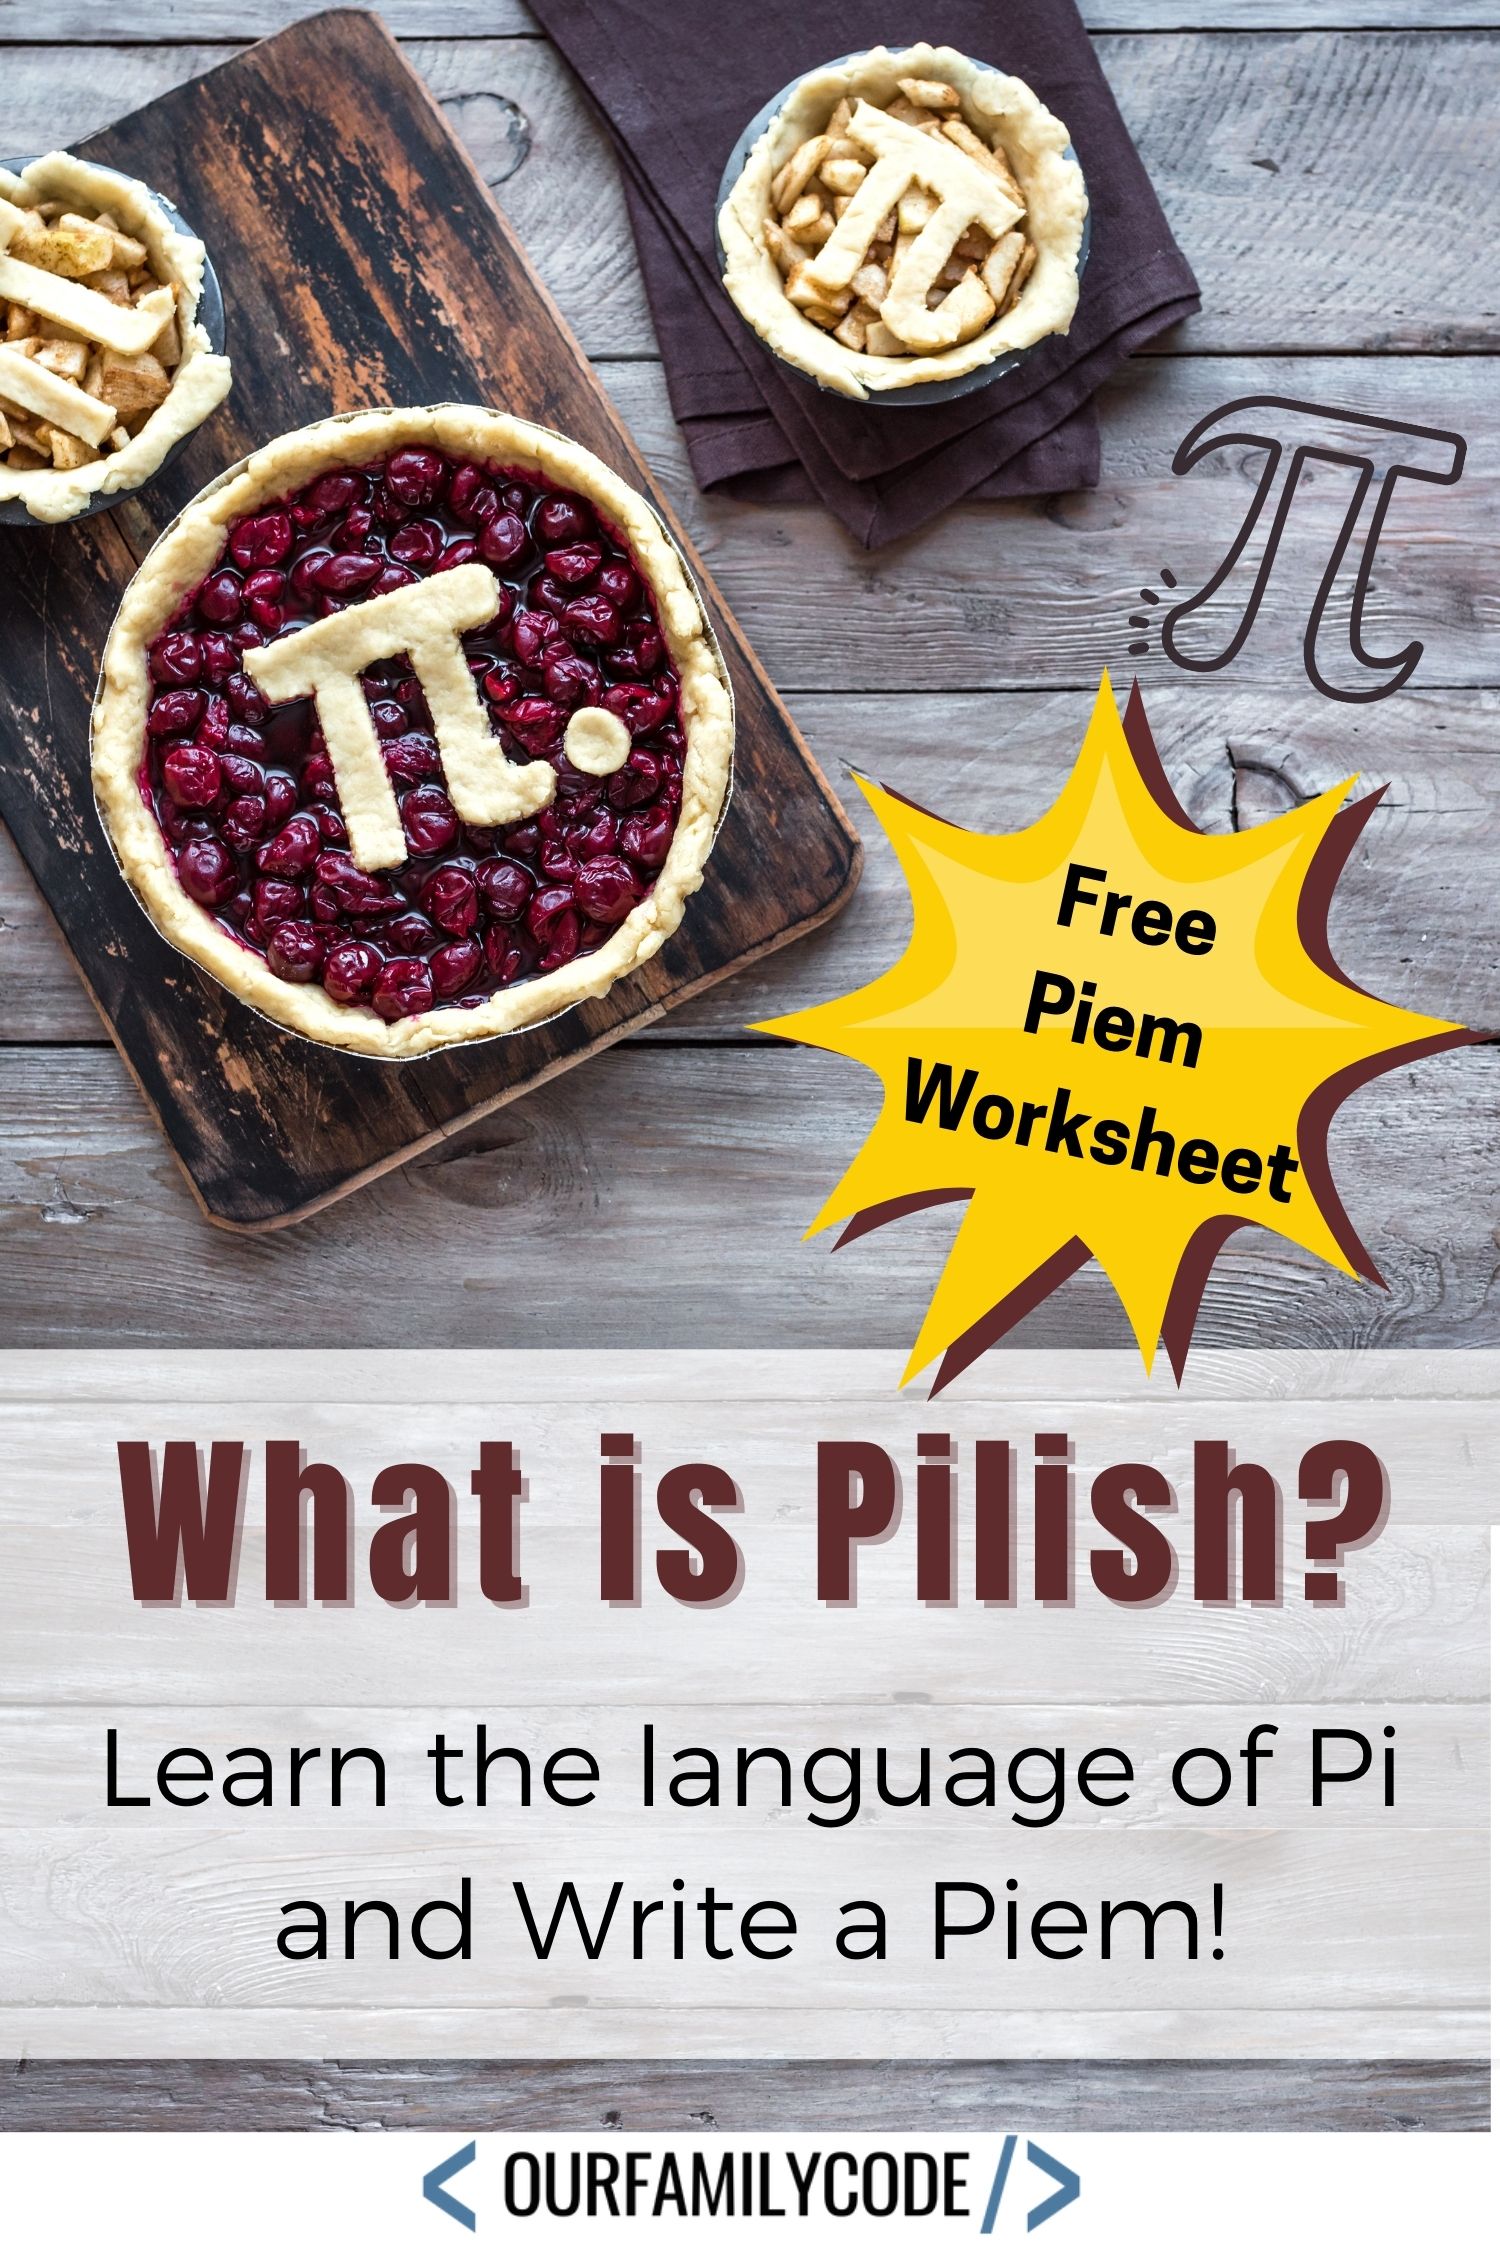 A picture of pies with the symbol for Pi on them with What is Pilish written in red.